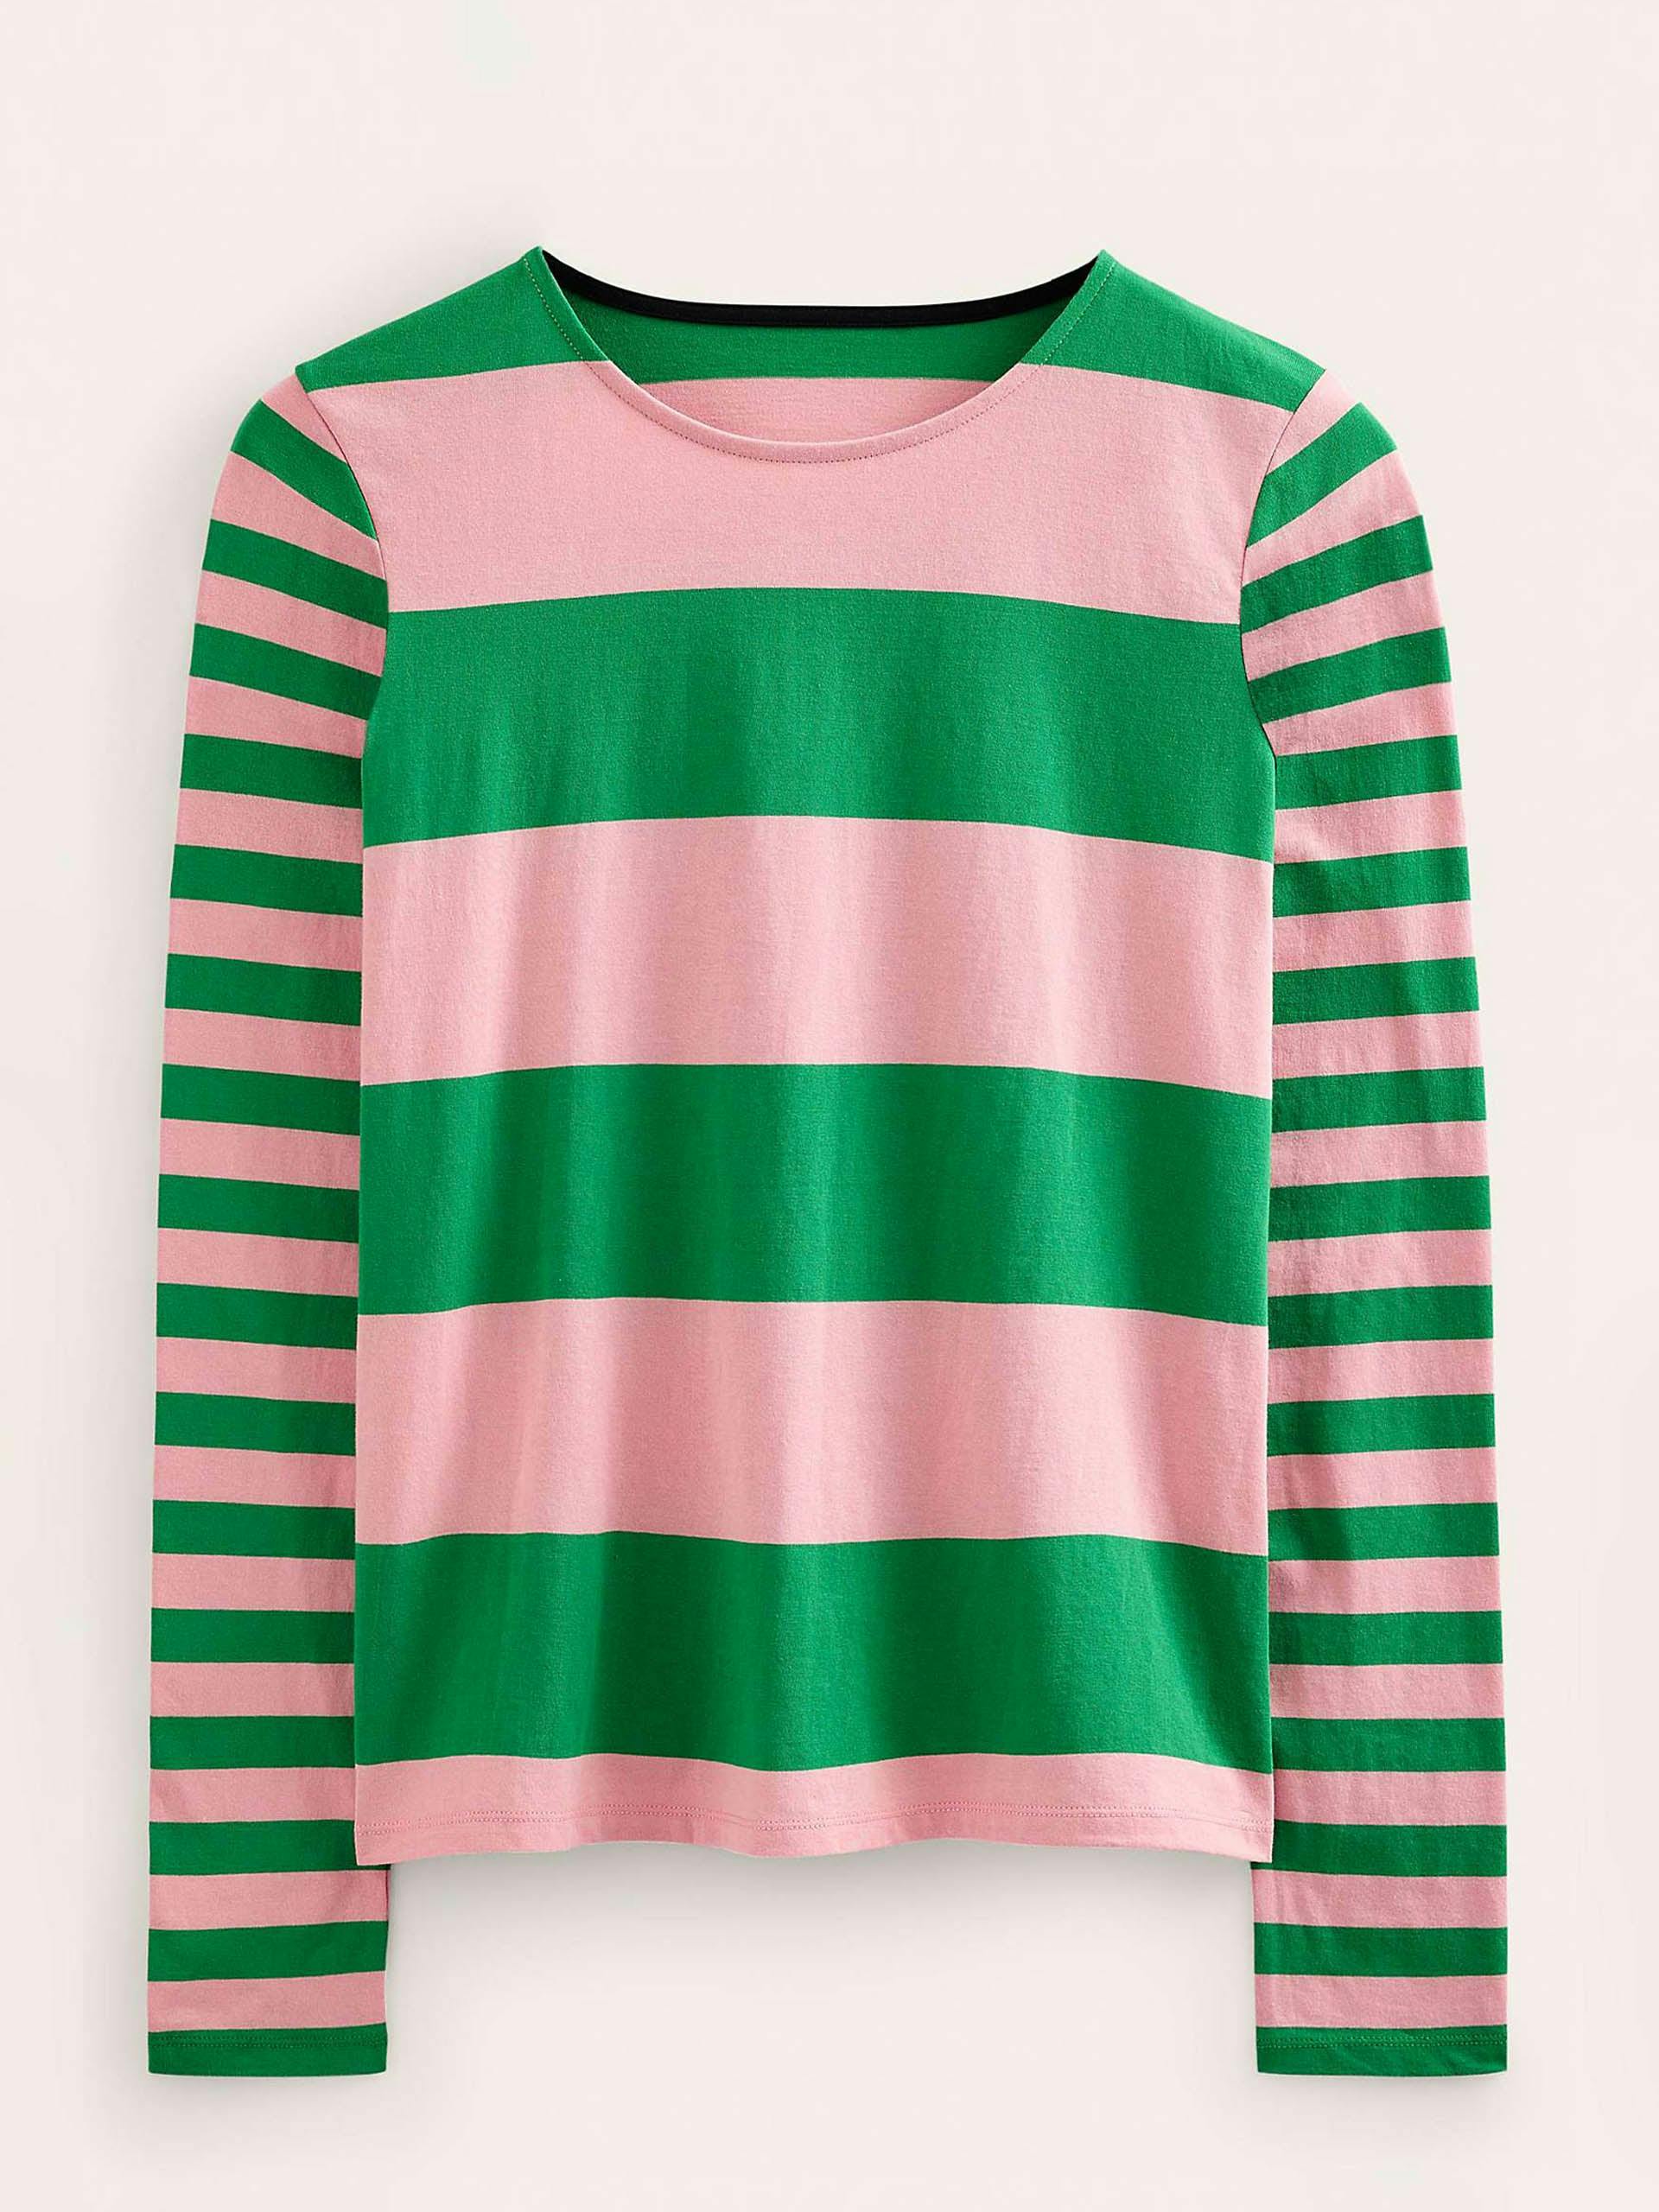 Green and pink striped long sleeve top